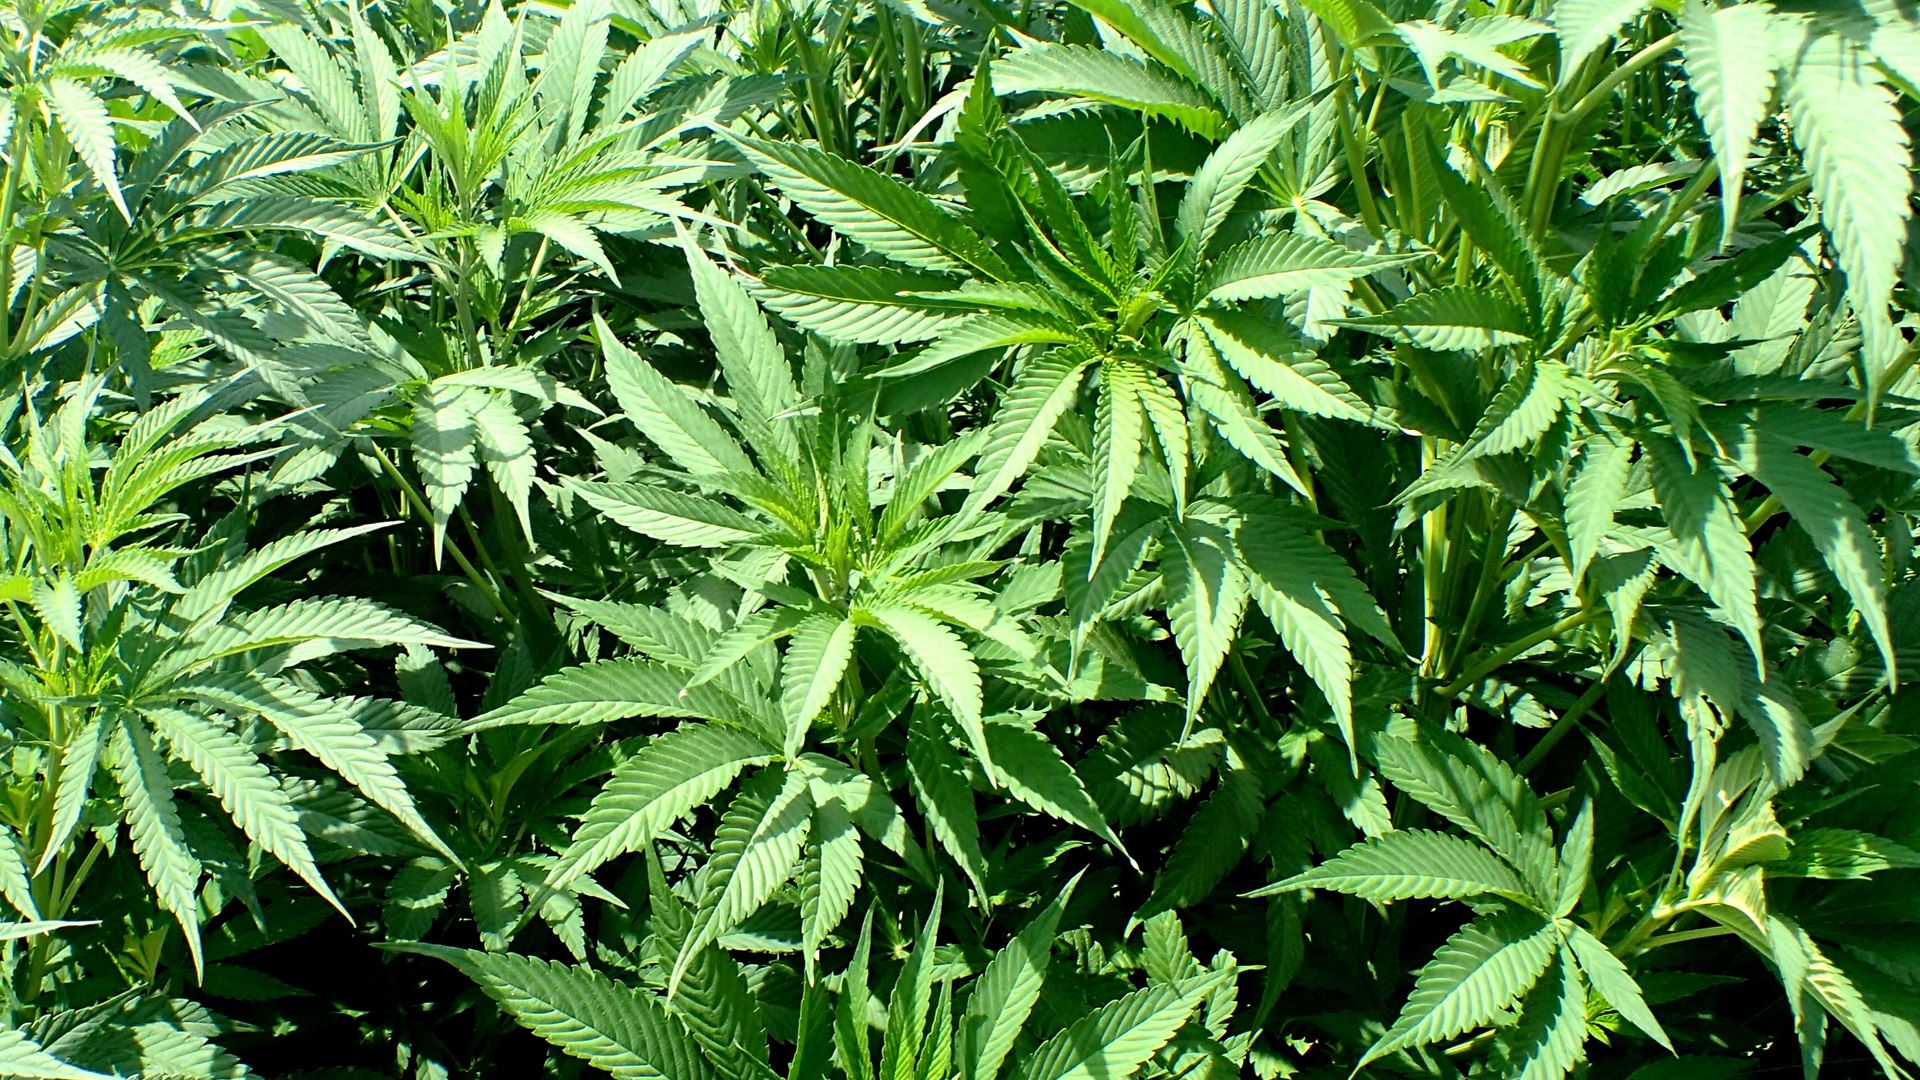 NMSU’s Cooperative Extension Service to host hemp production workshops